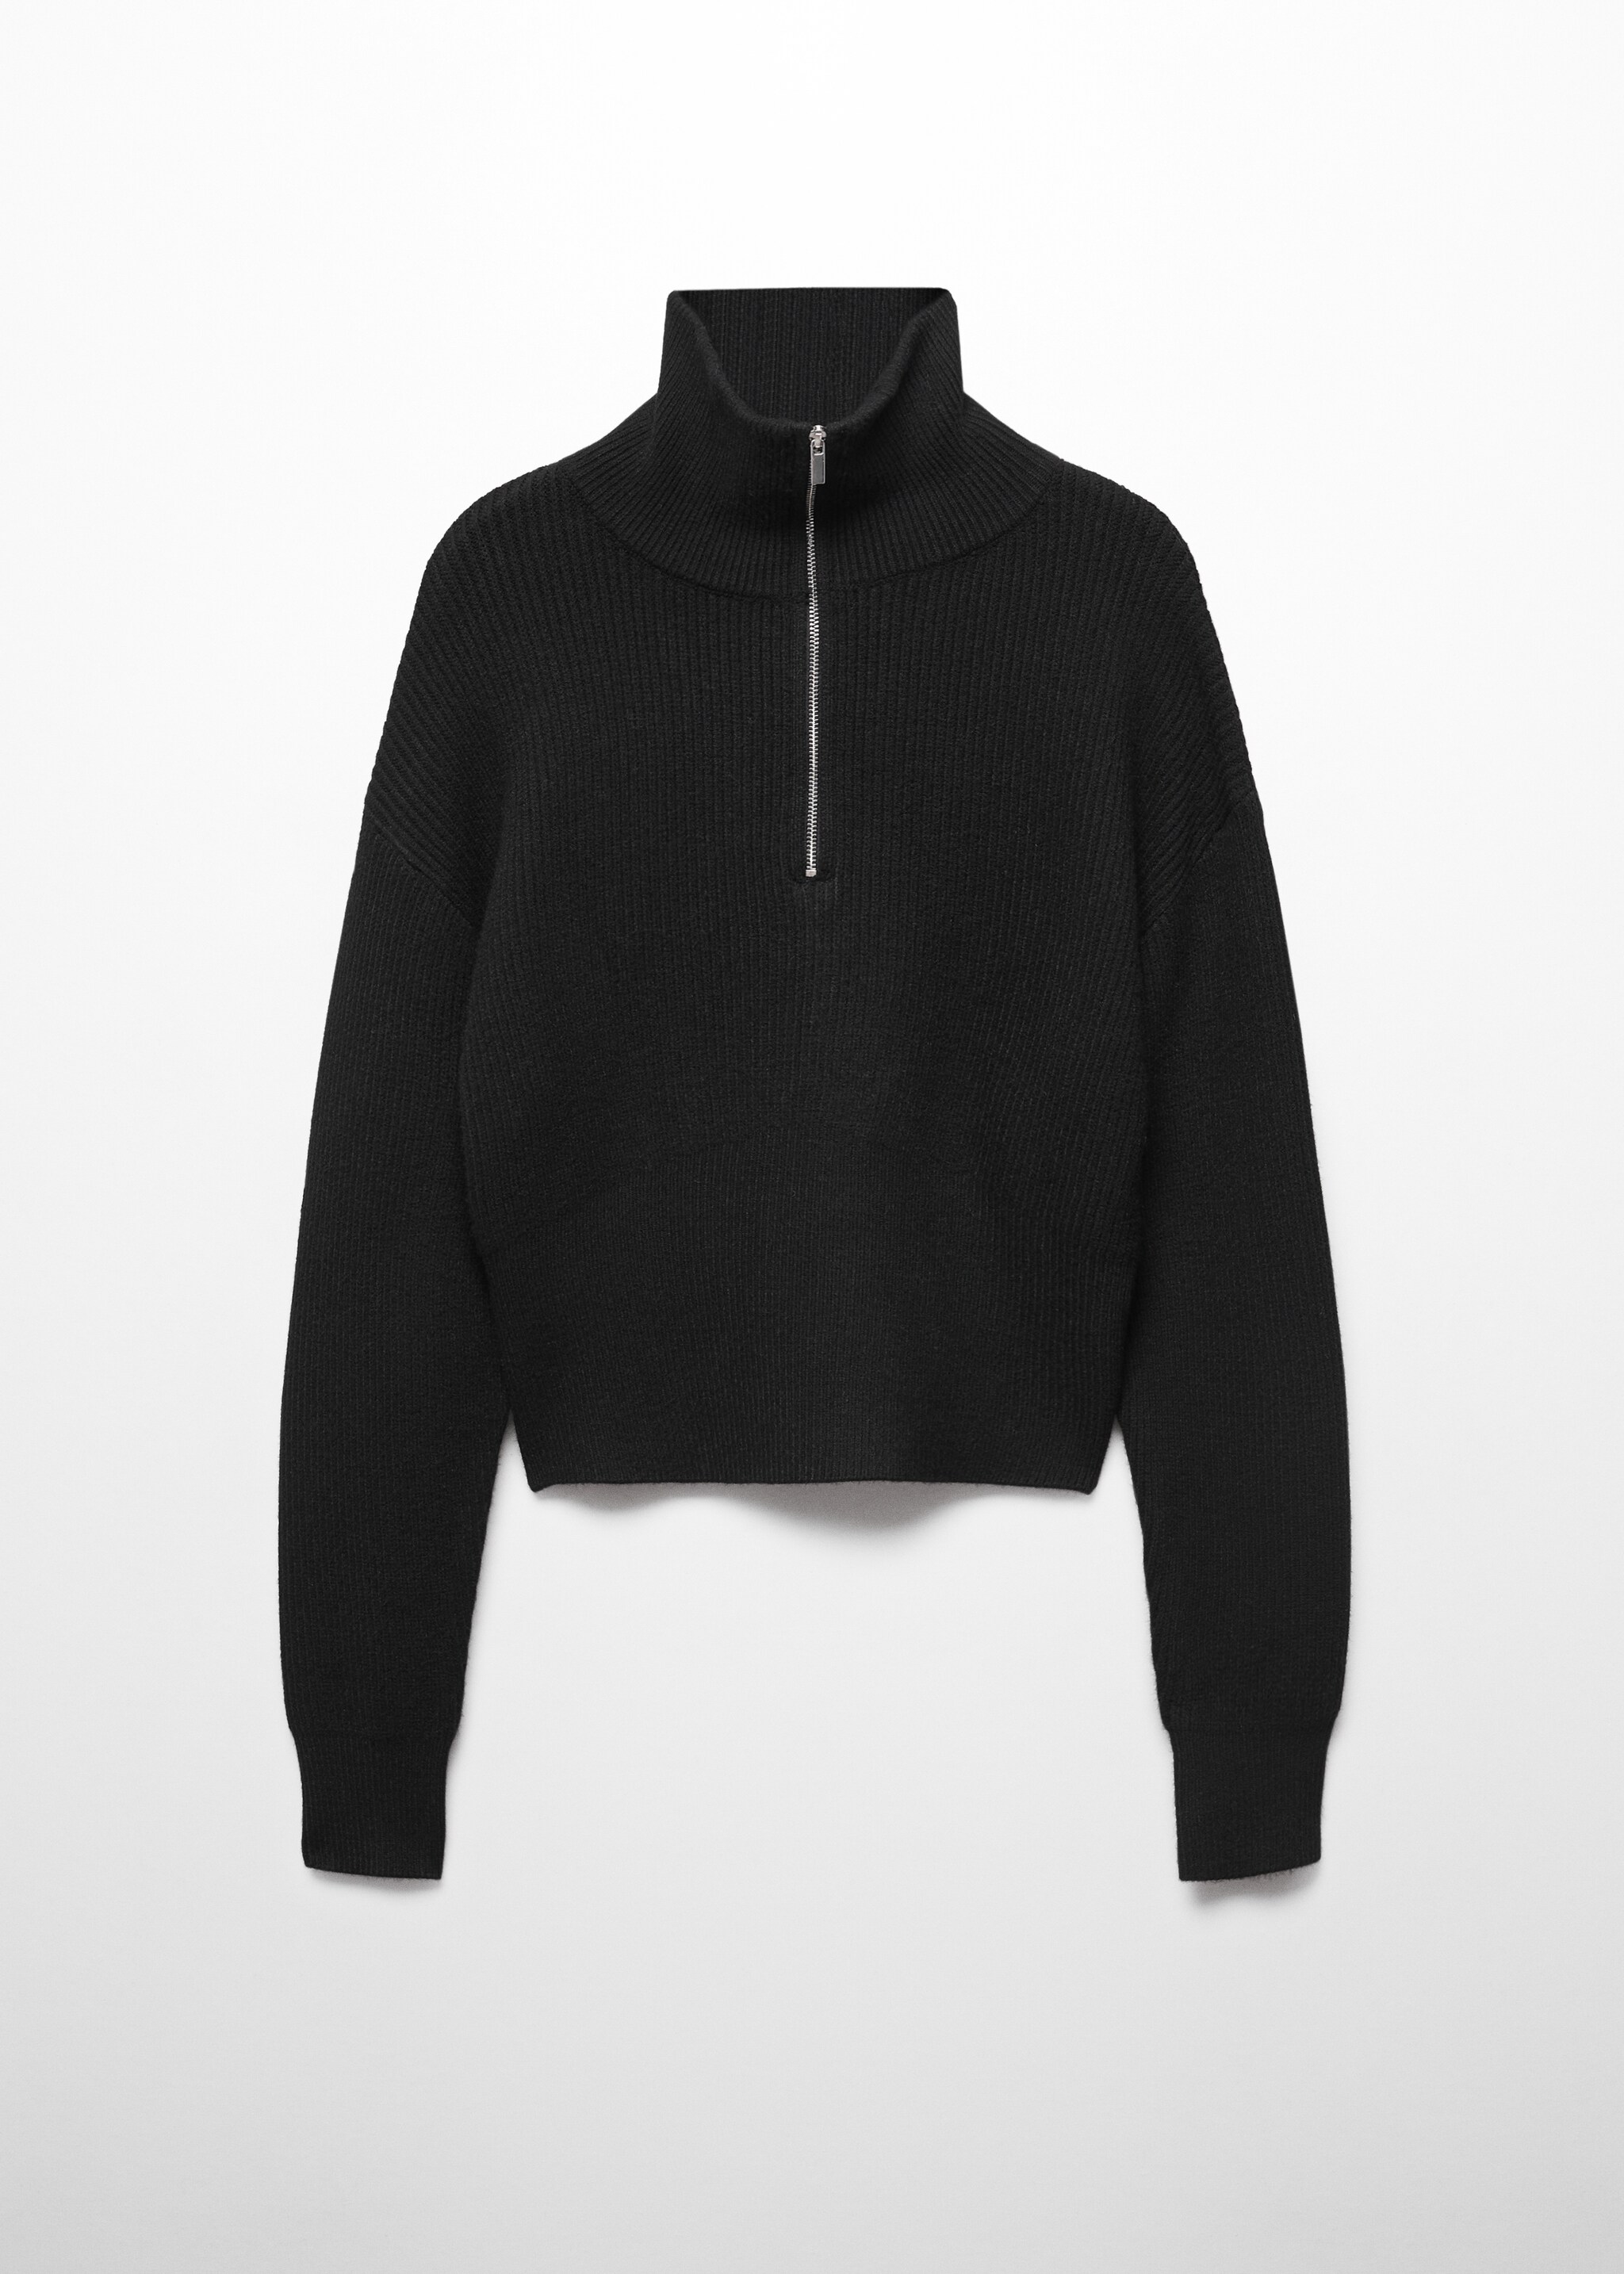 Zip neck jumper - Article without model